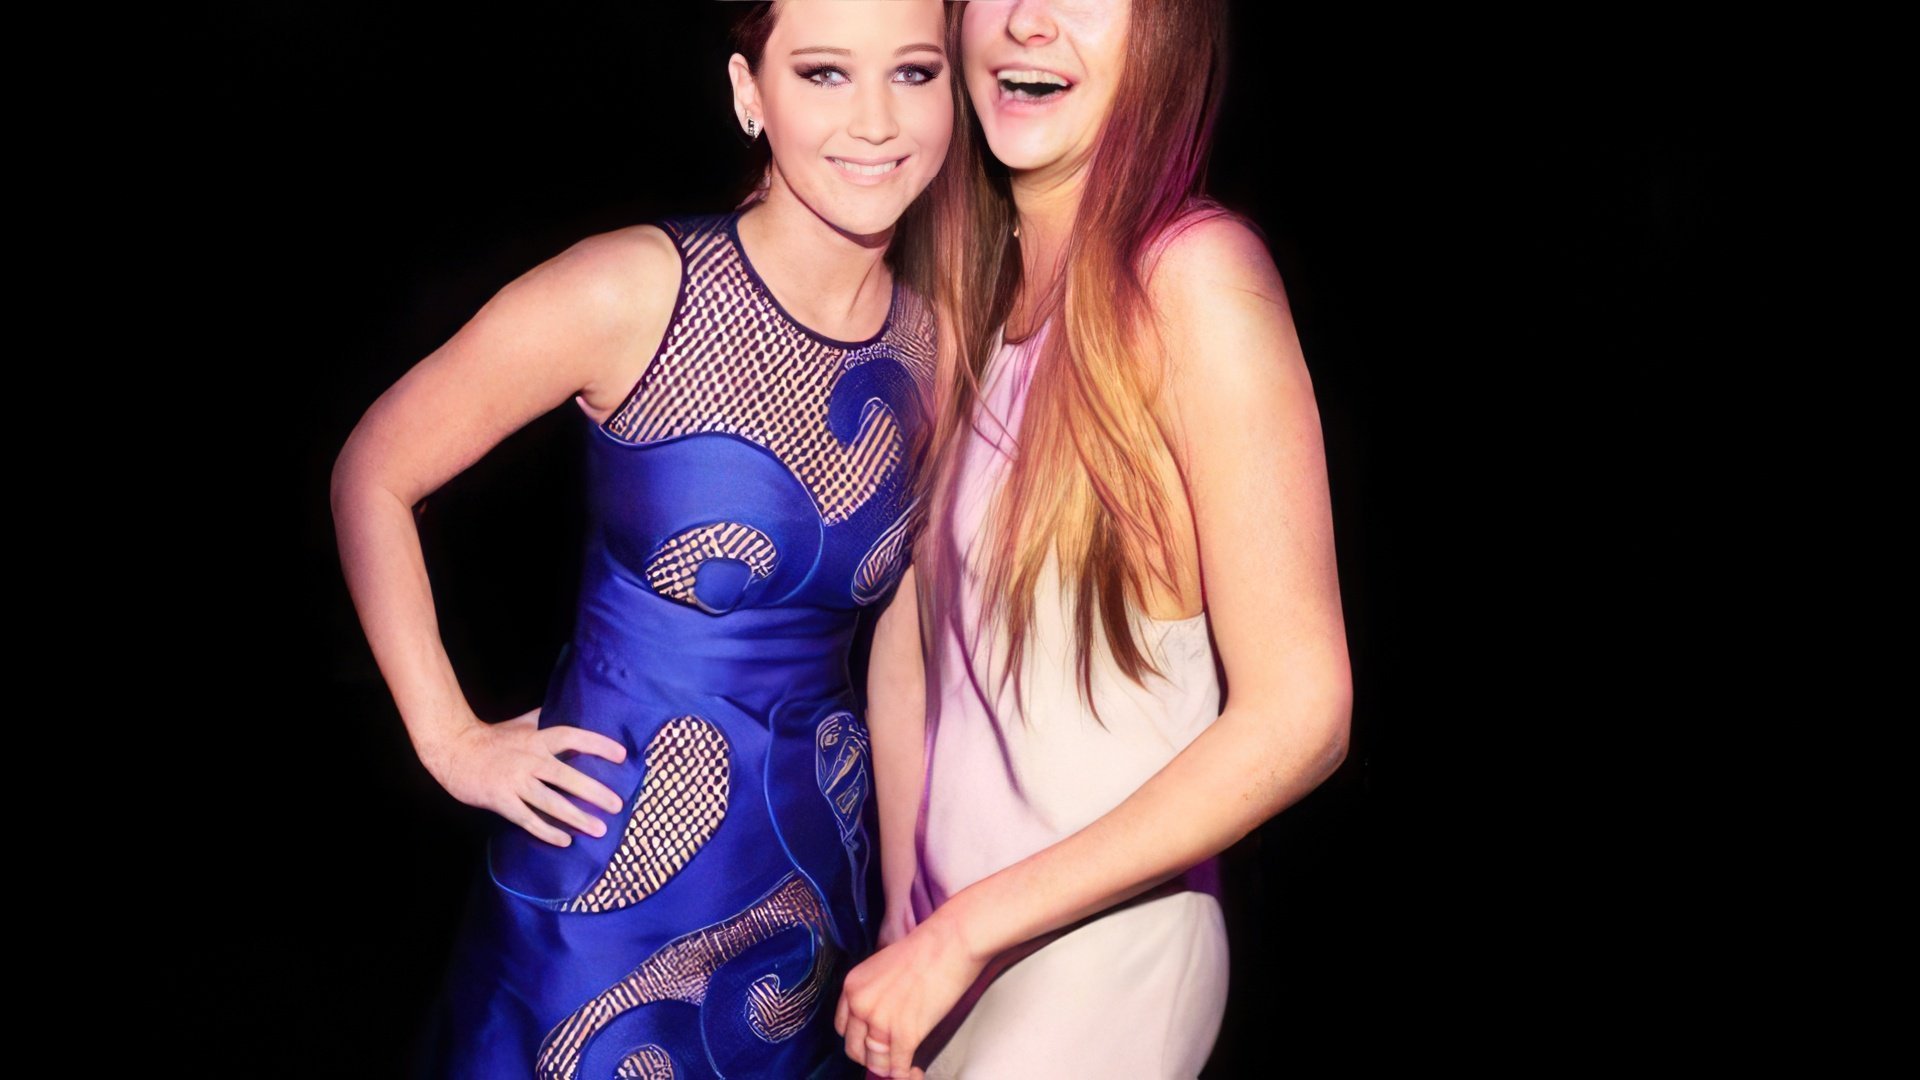 In the real life, Shailene Woodley and Jennifer Lawrence are good friends